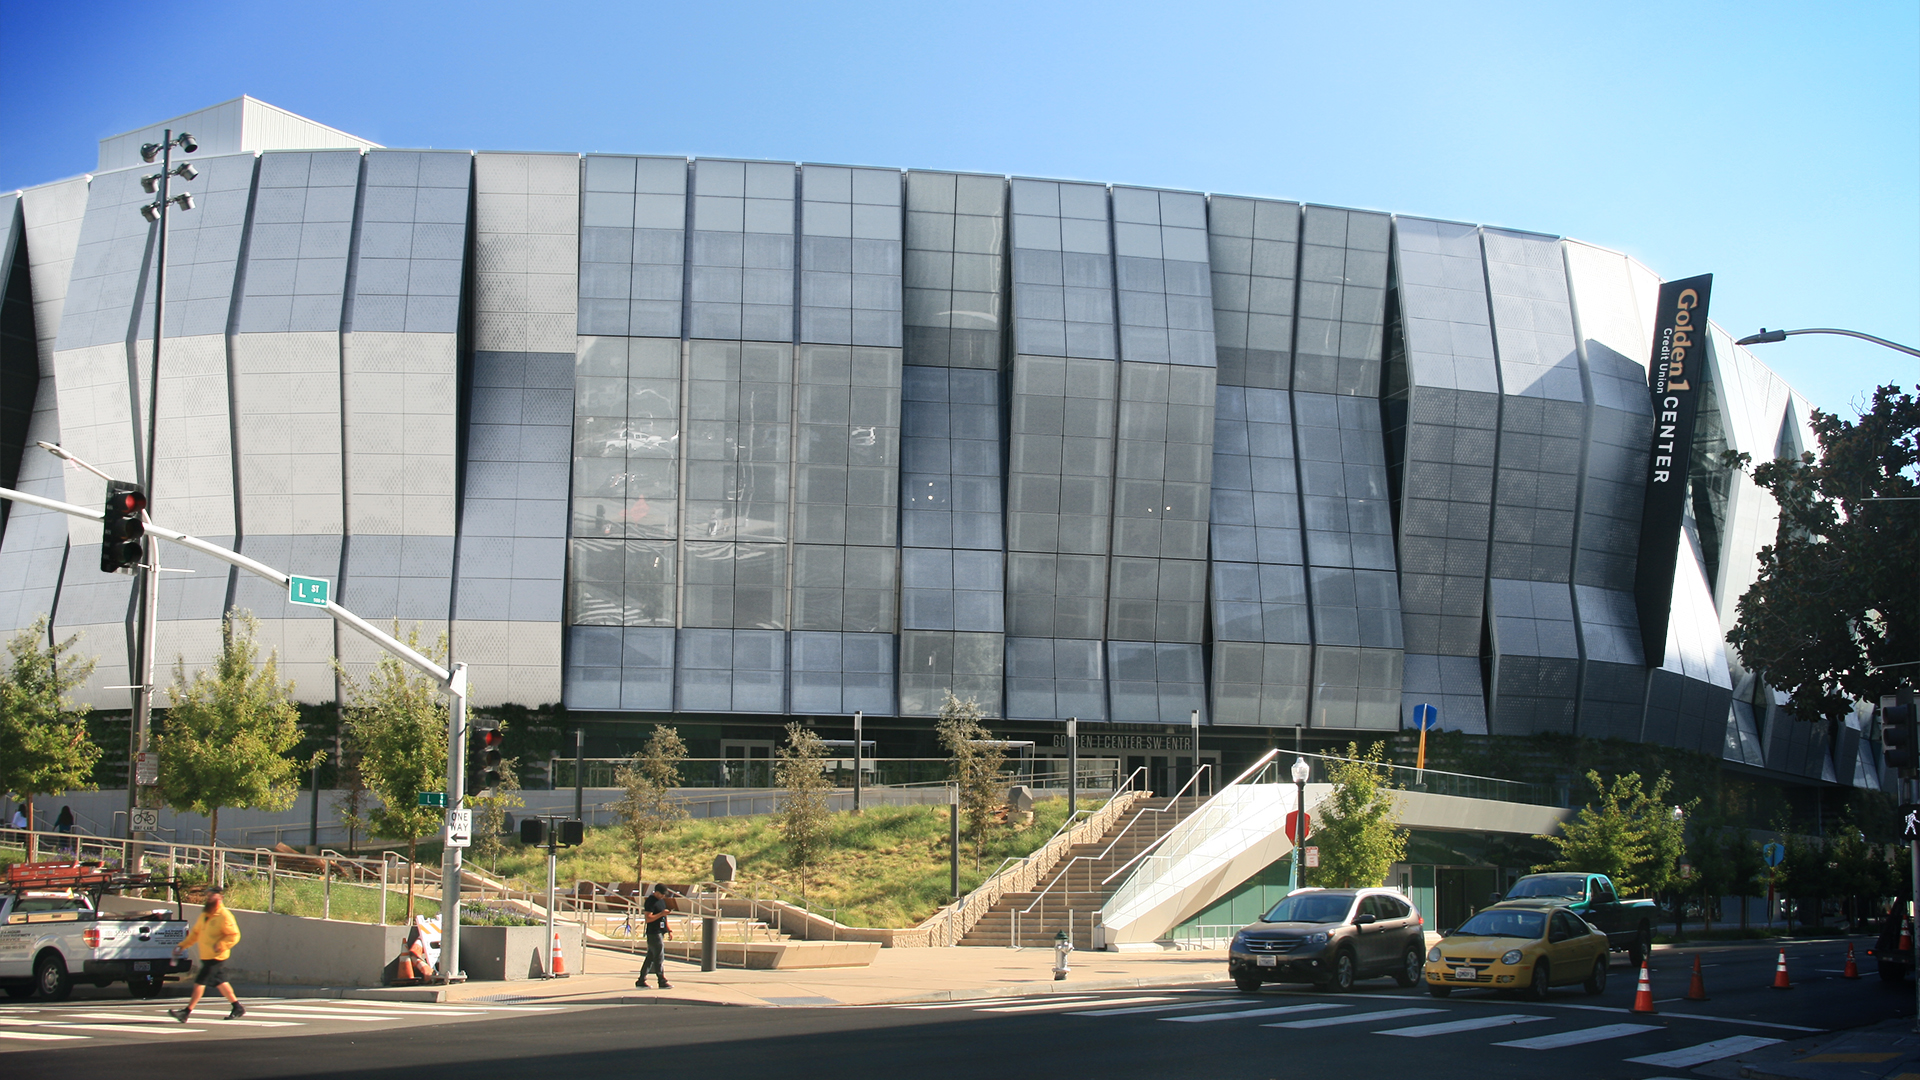 The Golden 1 Center is home to the Sacramento Kings